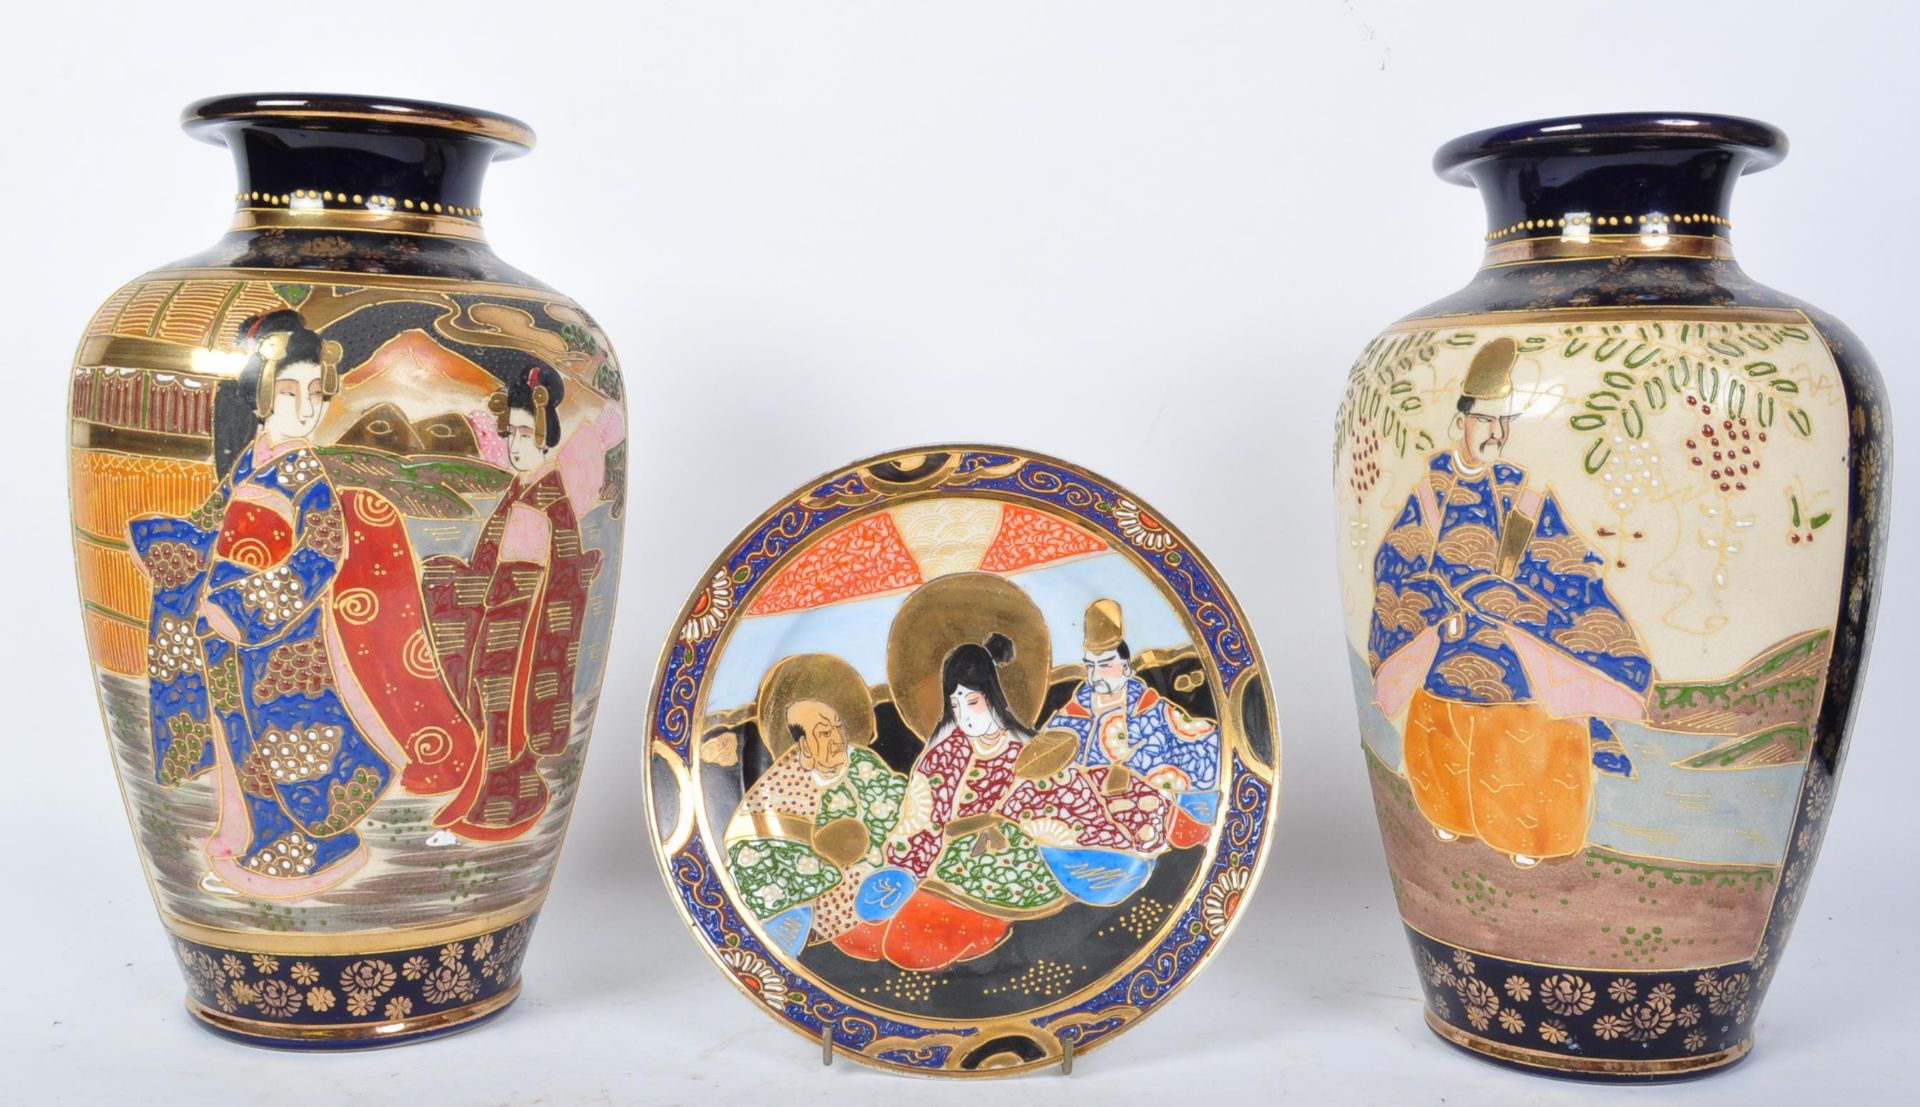 TWO LARGE 20TH CENTURY JAPANESE ORIENTAL VASES